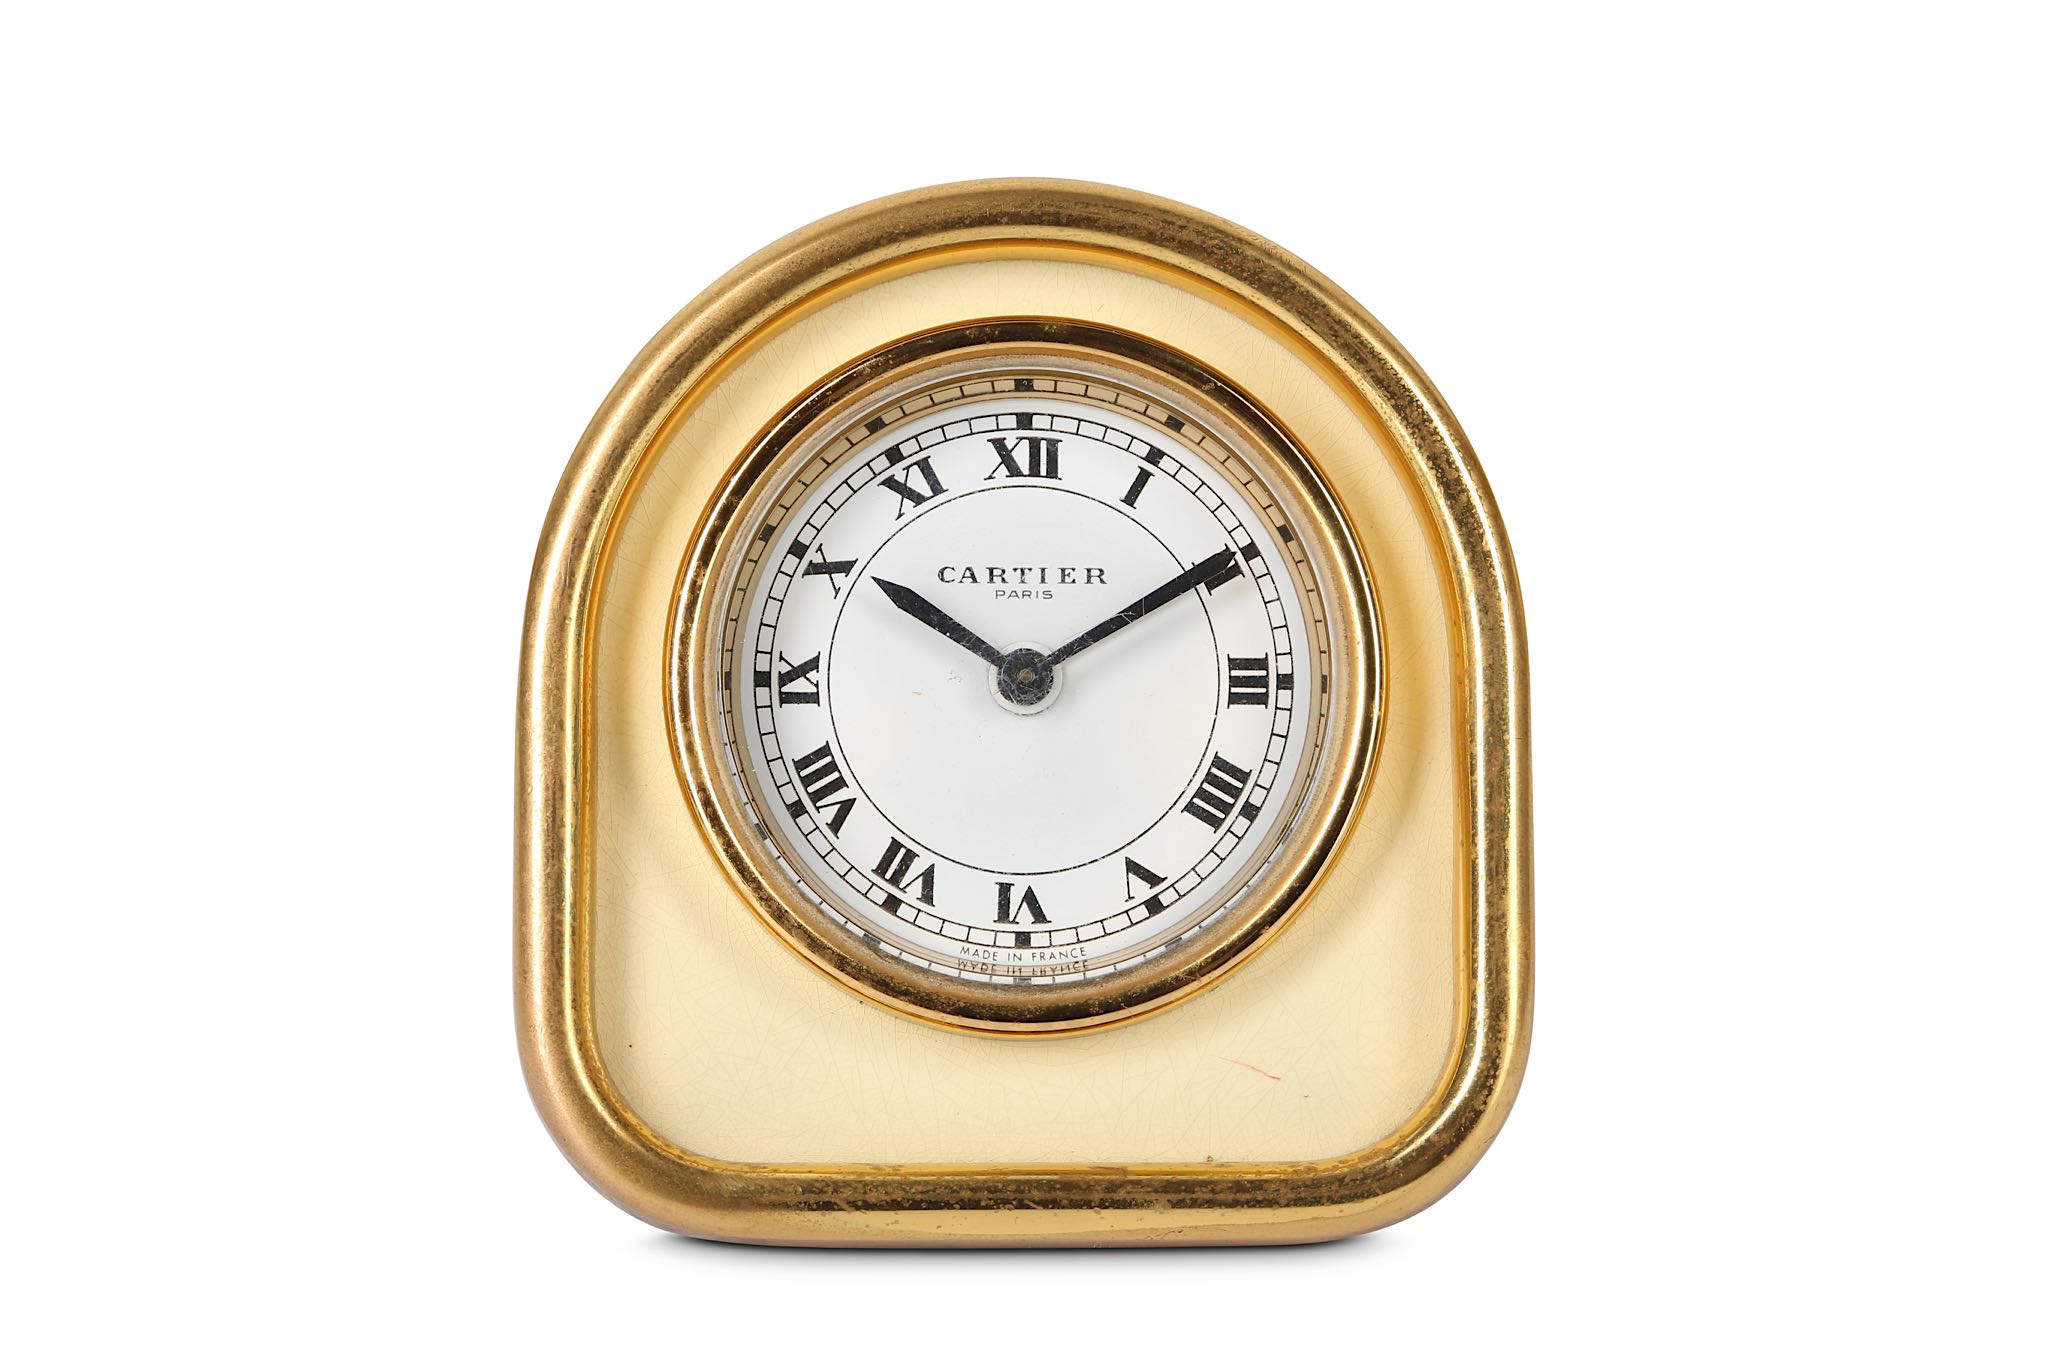 A LATE 20TH CENTURY CARTIER GILT BRASS ALARM CLOCK of arched frame form with cream enamel